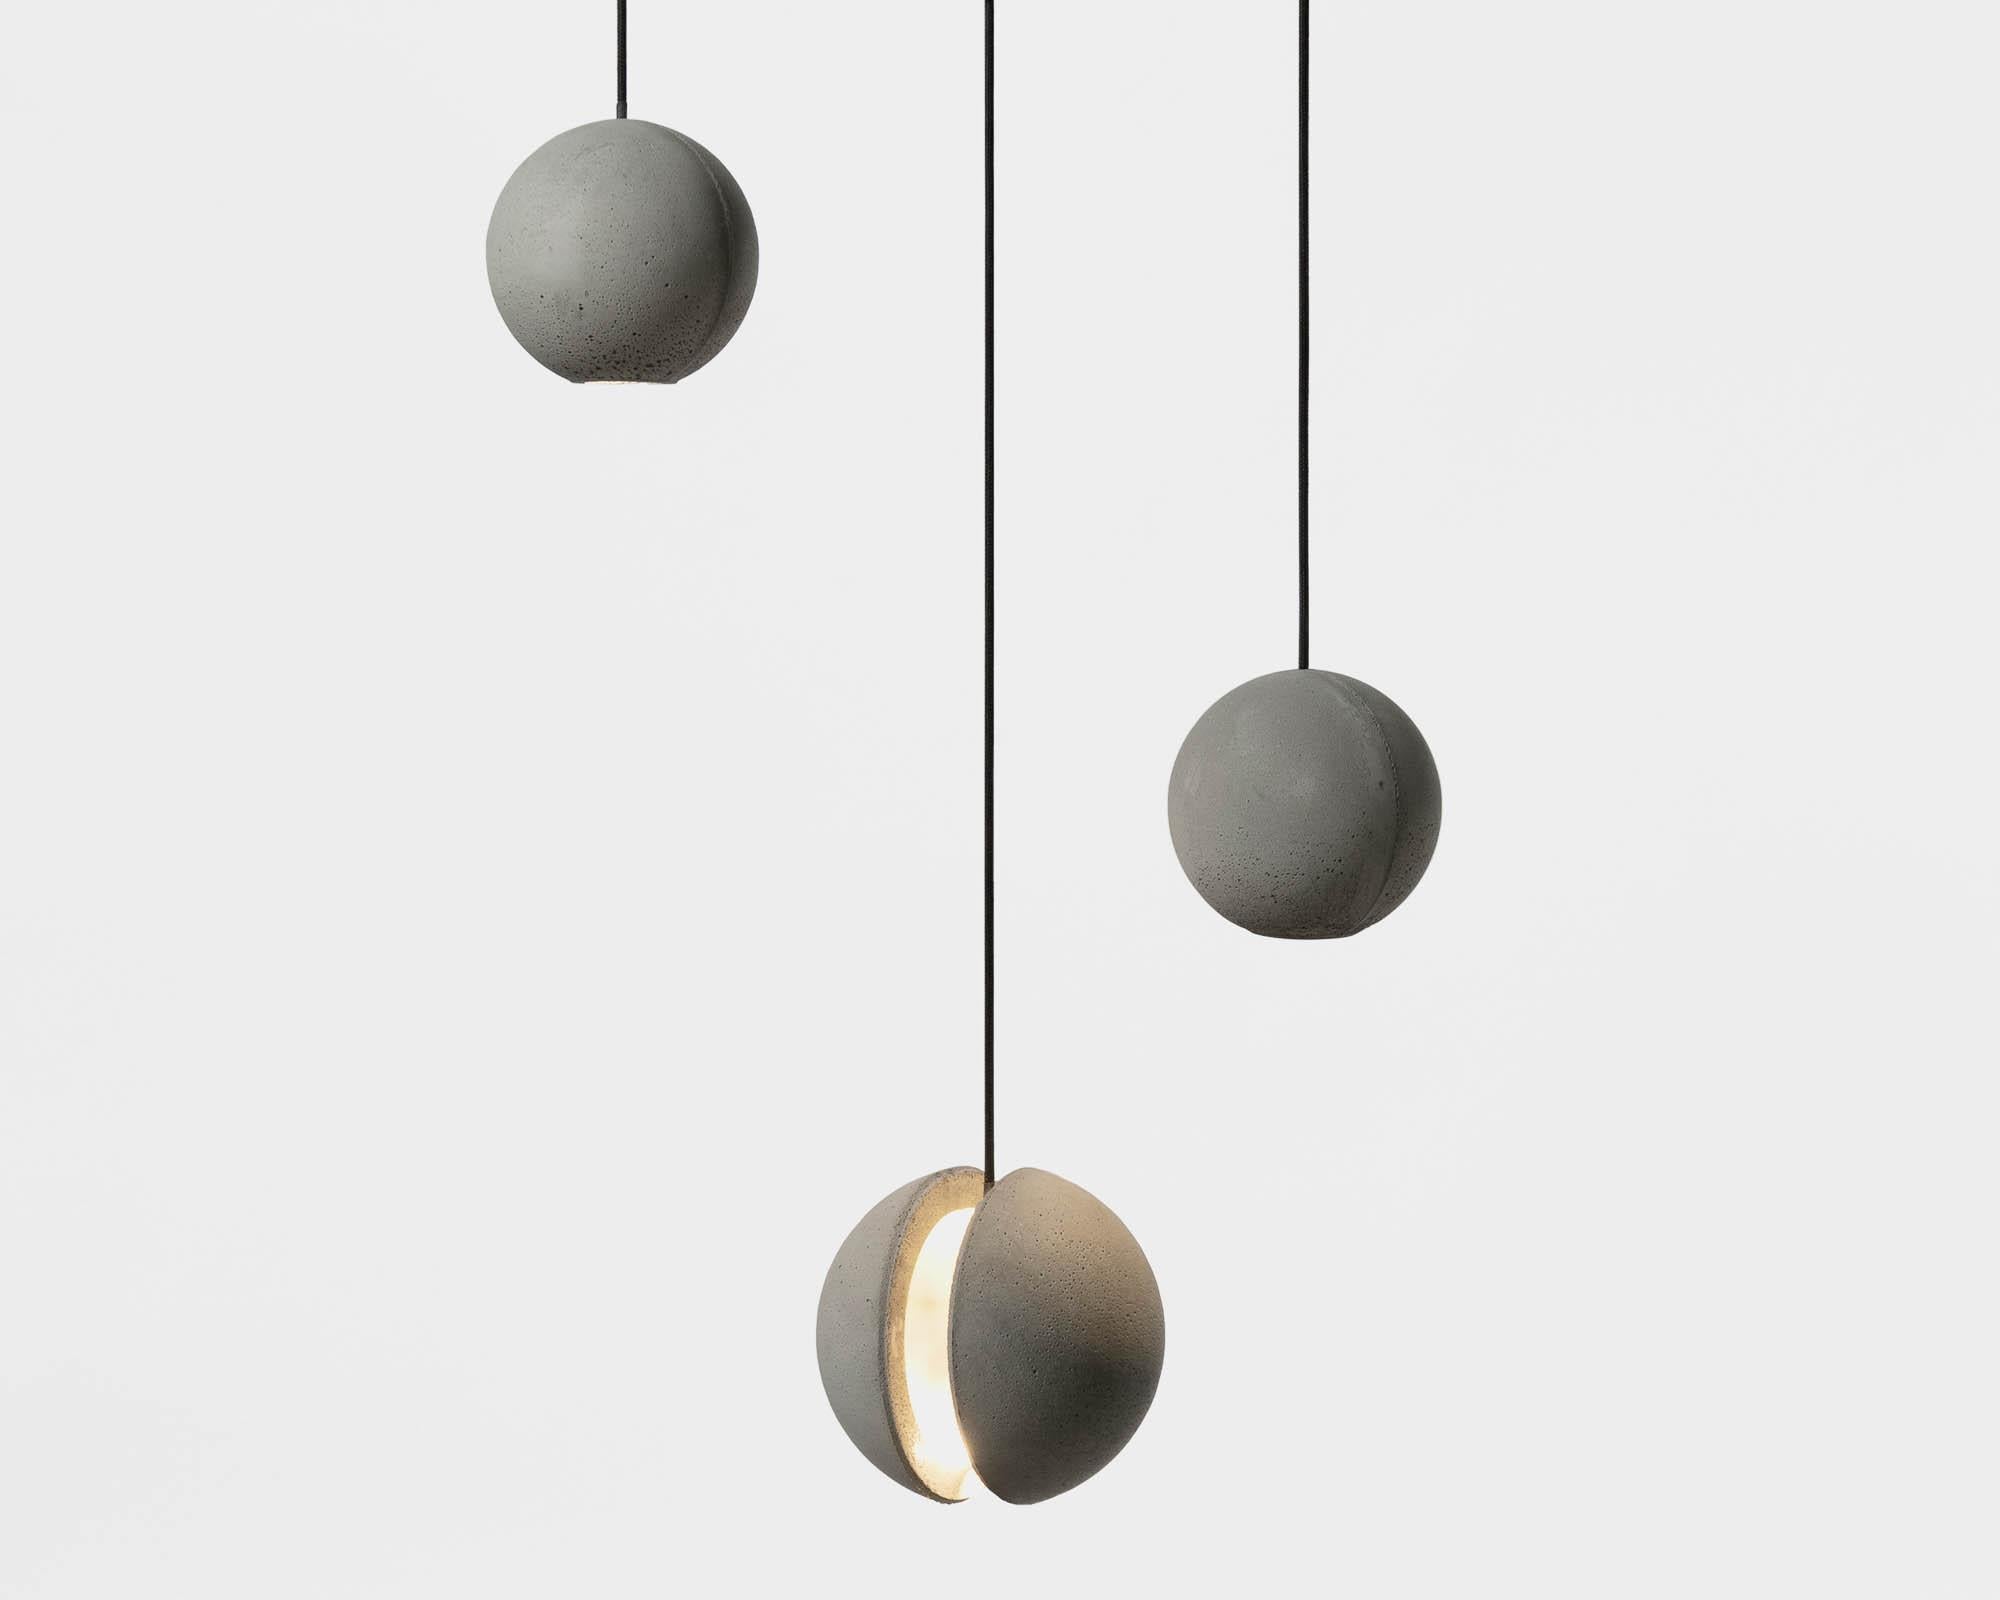 Moon S - pendant lamp by Bentu Design

Concrete
Measures: Ø 102 × H 98mm
1kg
Light source: G4 200lm 2700K AC 100-240V 50-60Hz 9W IP20 
Cord: 3m black
Ceiling rose: 110mm

Bentu Design's furniture and lightings derive its uniqueness from the